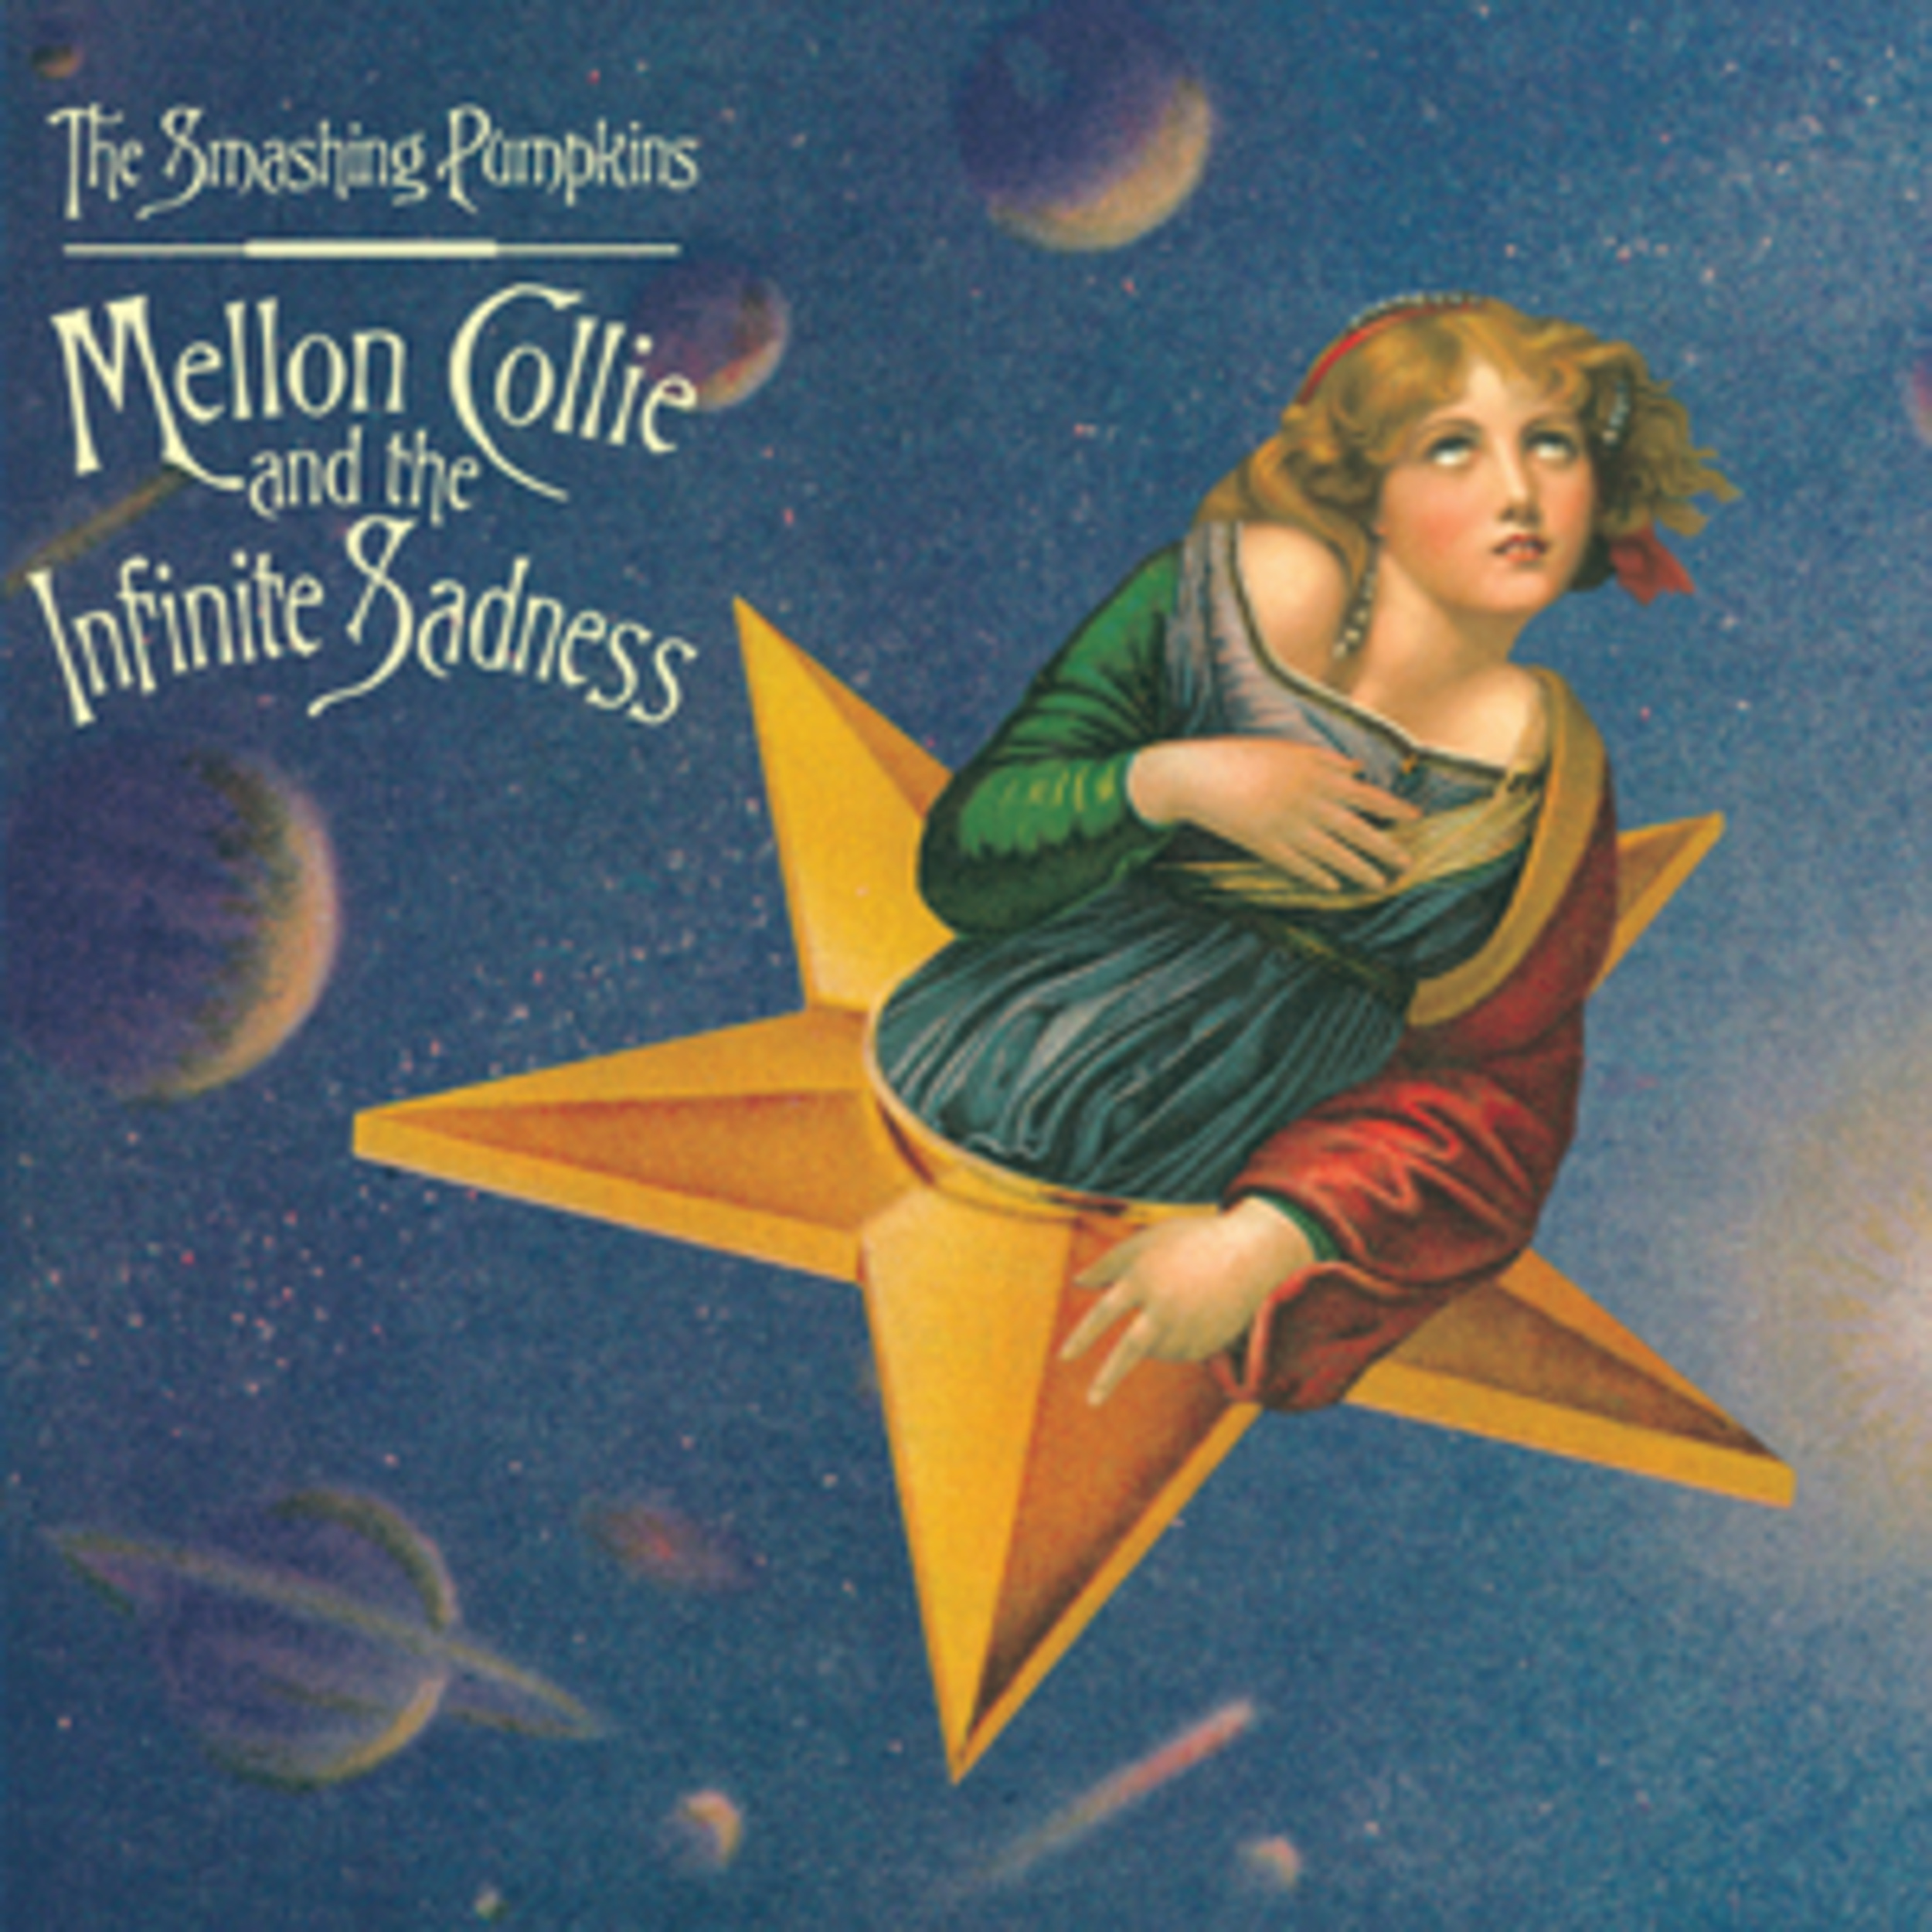 <p><em>Mellon Collie and the Infinite Sadness </em>debuted at No. 1 on the Billboard 200 and spawned five singles. It remains one of the great alternative rock albums of all time. "Zero" was one of those singles. <a href="https://www.youtube.com/watch?v=3wk7C64kaP4">It's among the heavier songs on the album</a> and rather relentless in a mainstream alt-rock sort of way. Even before the song was released, we often saw Billy Corgan sporting a shirt with "ZERO" spread across. </p><p><a href='https://www.msn.com/en-us/community/channel/vid-cj9pqbr0vn9in2b6ddcd8sfgpfq6x6utp44fssrv6mc2gtybw0us'>Follow us on MSN to see more of our exclusive entertainment content.</a></p>